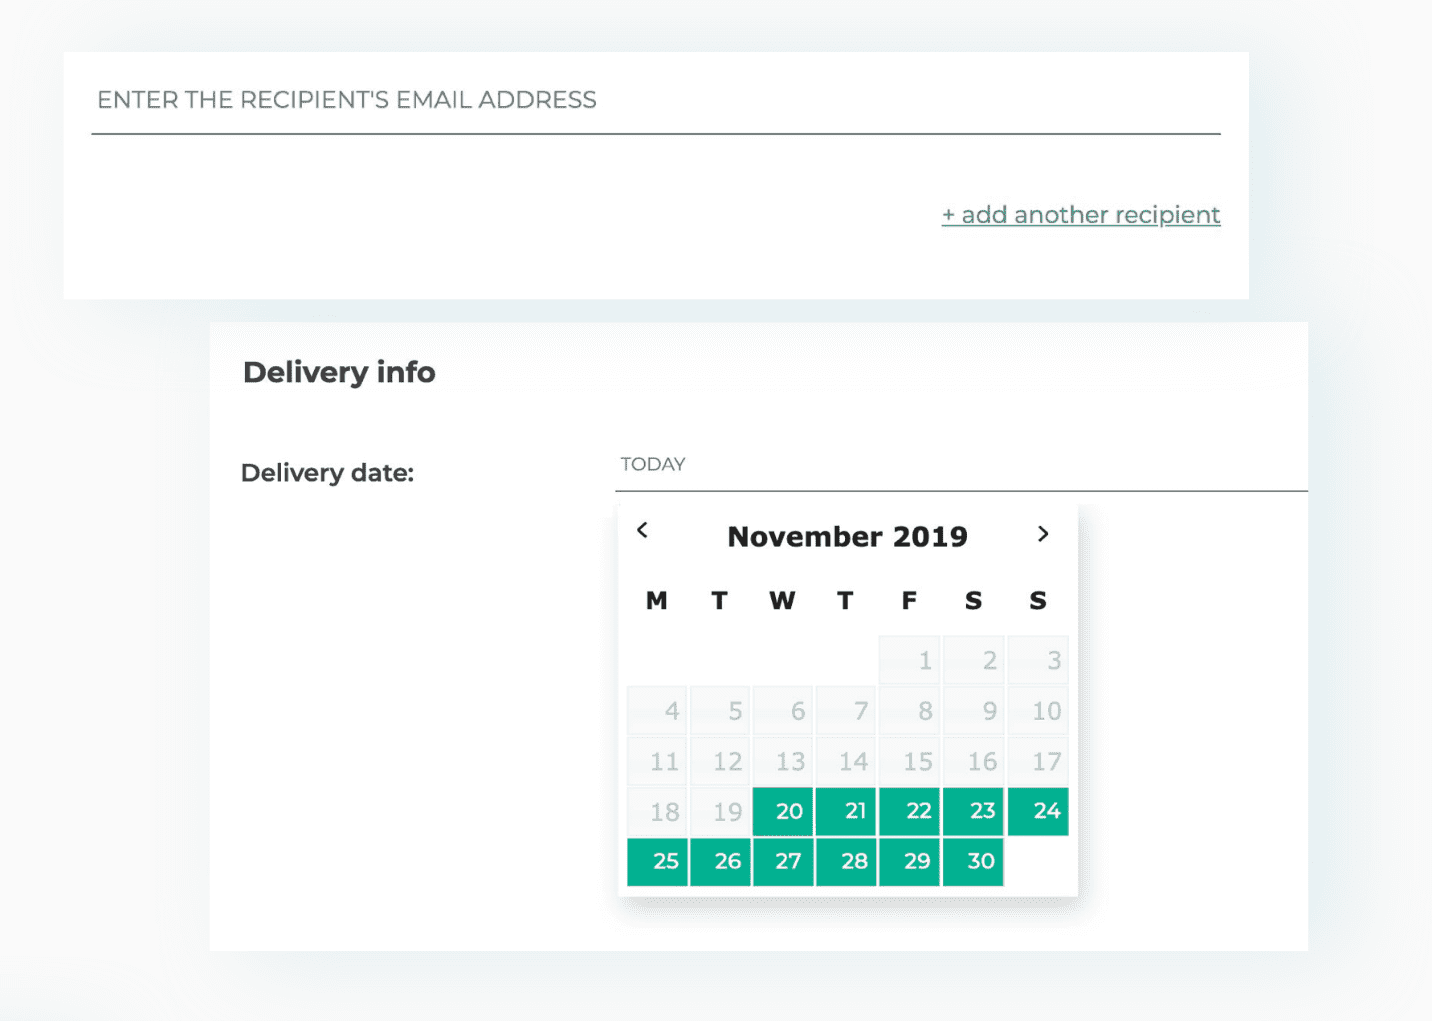 YOUR CUSTOMERS CAN SEND TO MULTIPLE RECIPIENT & SCHEDULING A DELIVERY DATE